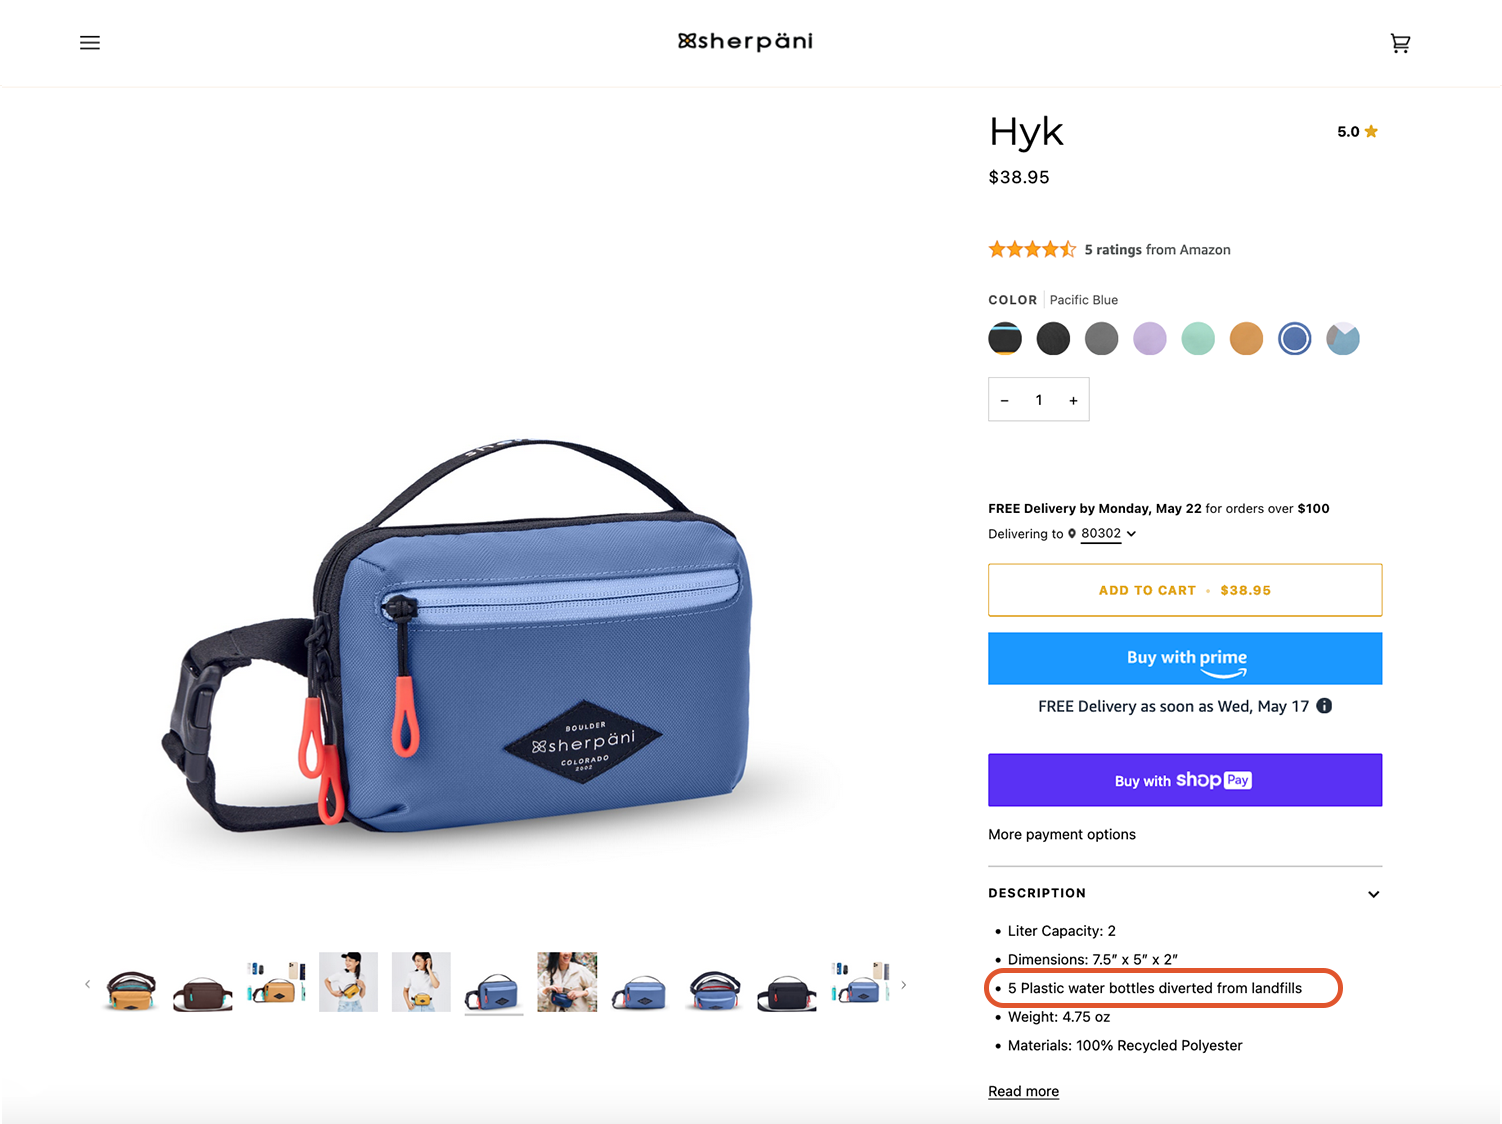 Product detail screenshot of Sherpani website. Sherpani fanny pack, the Hyke is Pacific Blue, is being features. A red circle in the lower right corner highlights the bottle count (5).